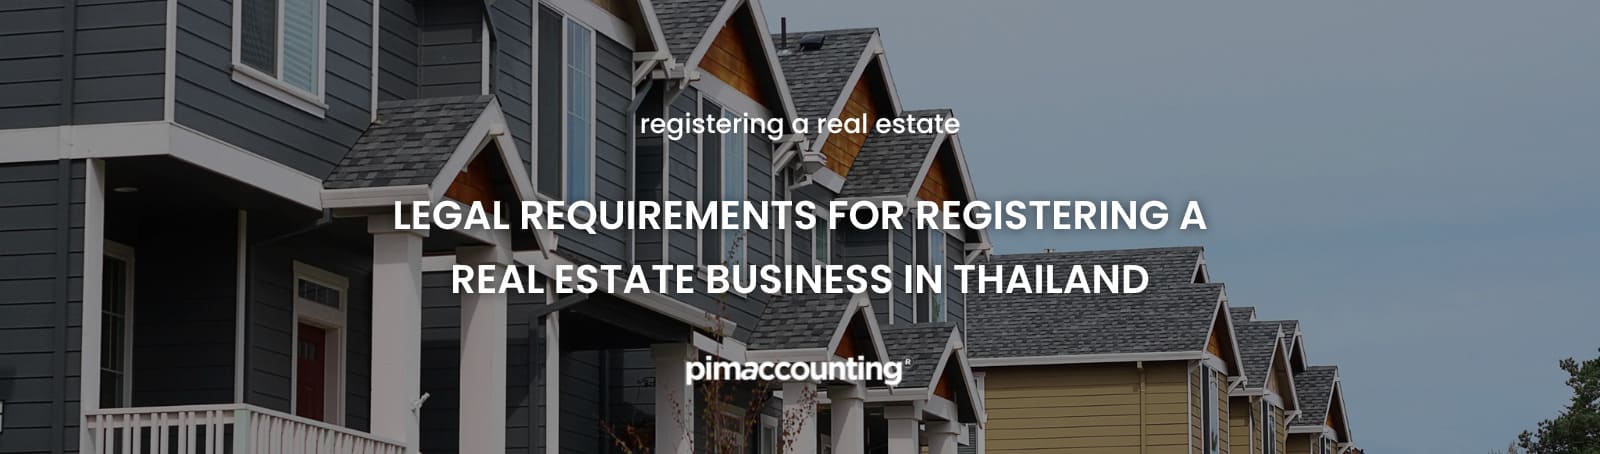 Legal requirements for registering a real estate business in Thailand - Pimaccounting